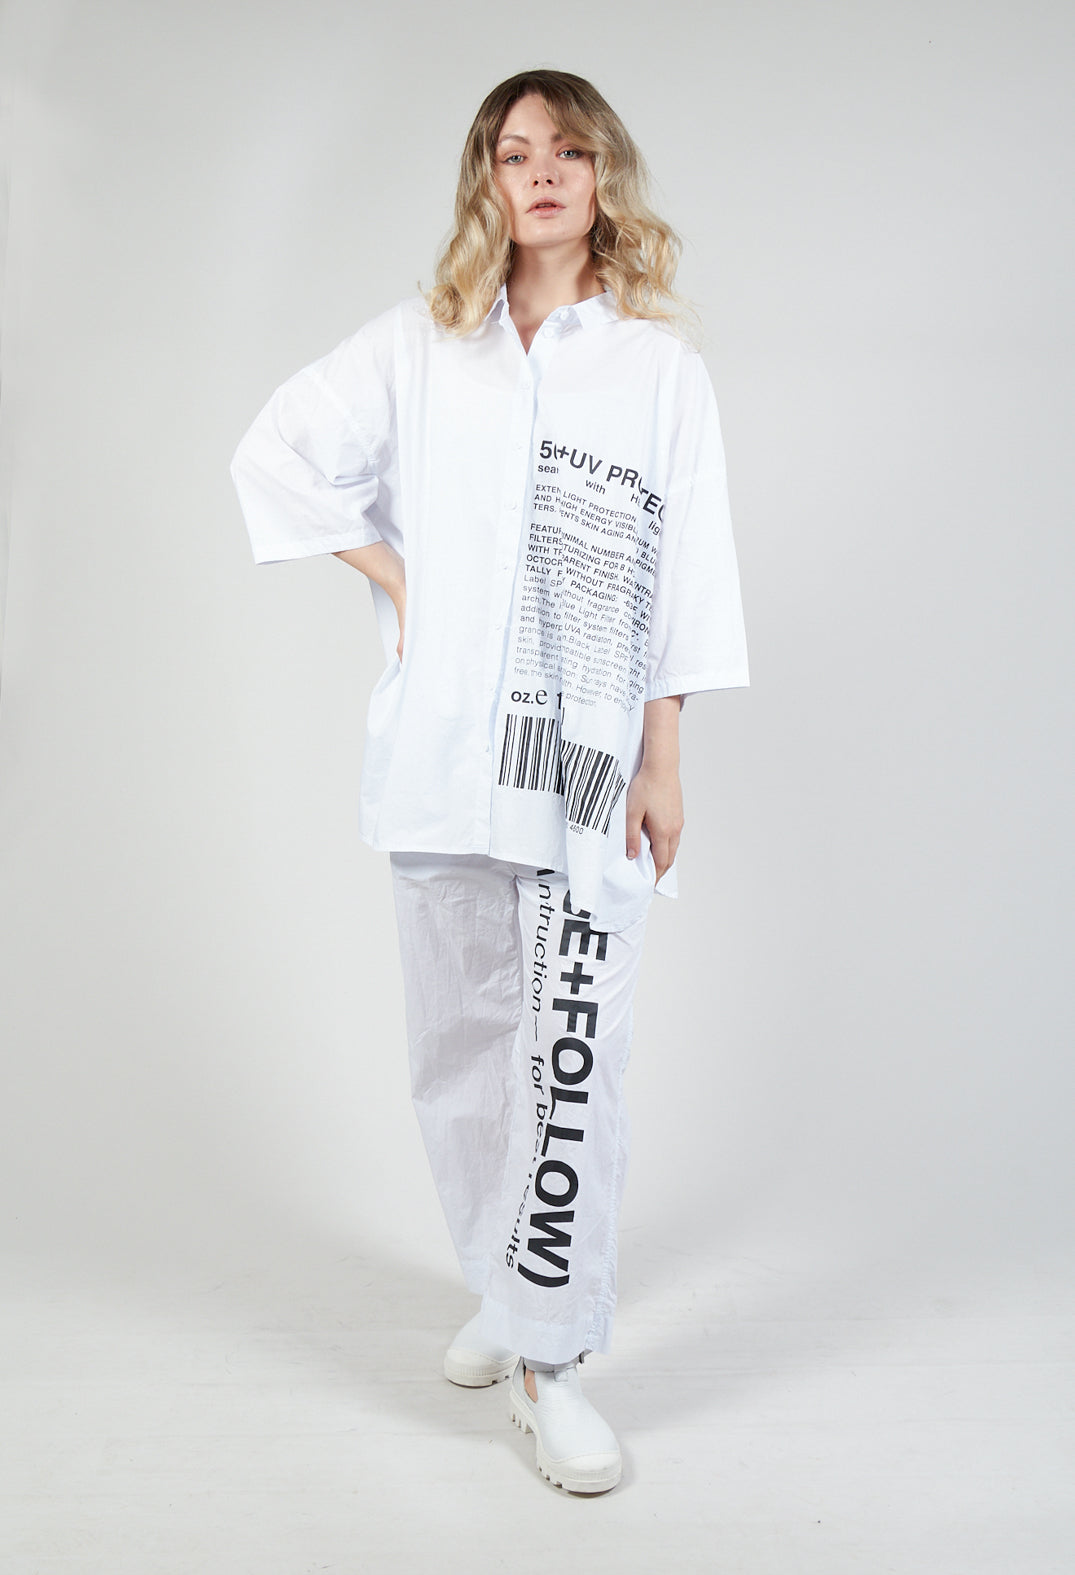 Relaxed Fit Shirt with Lettering Motif in White Print